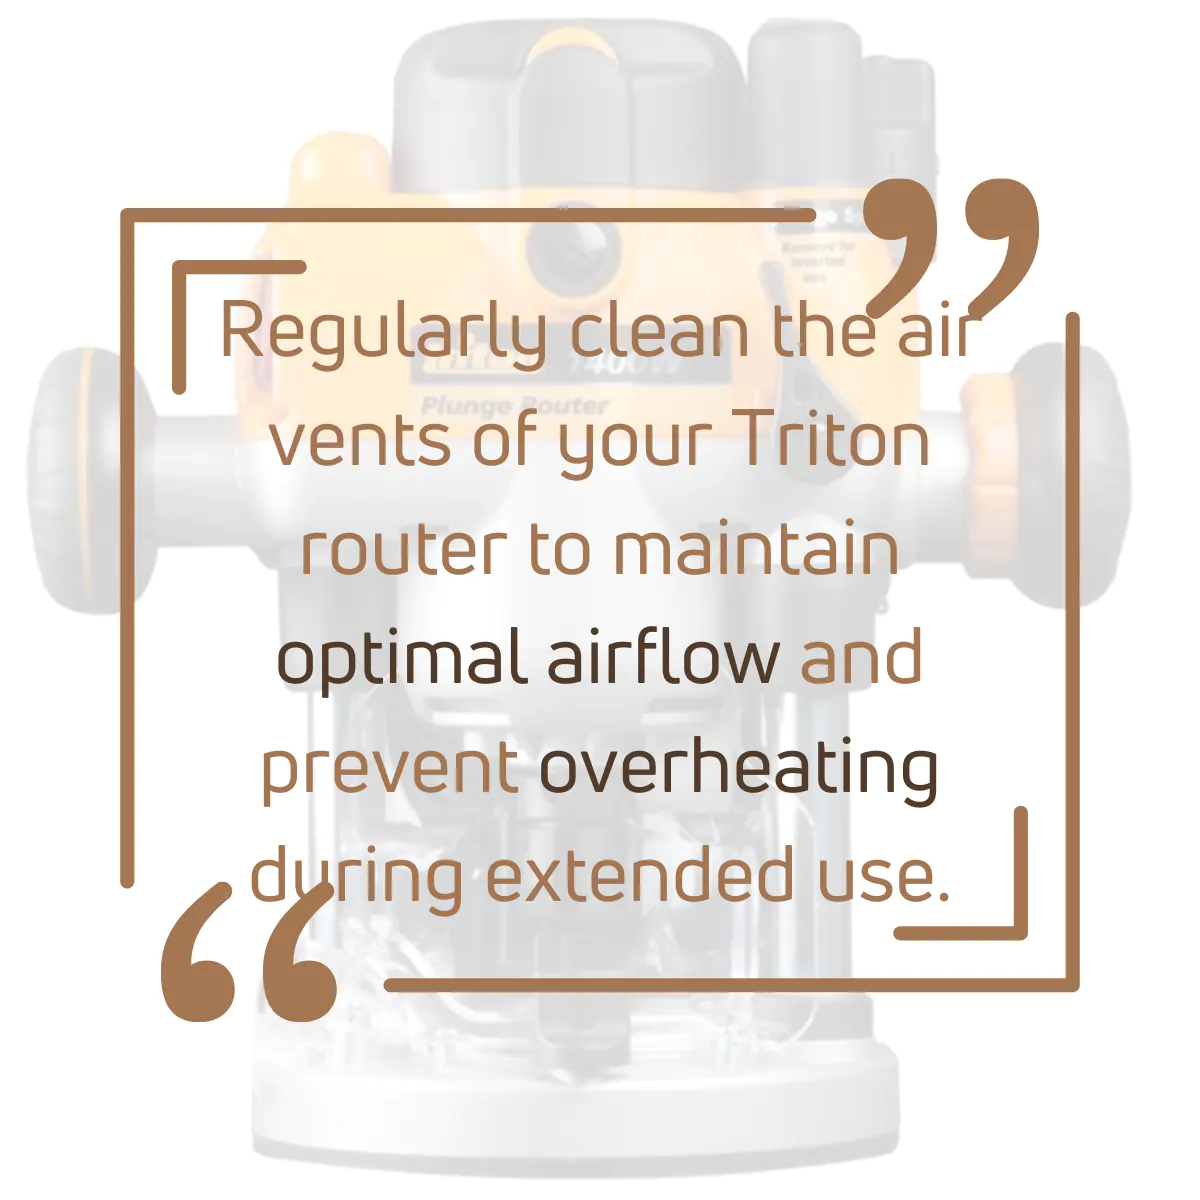 Tip for using with Triton Router